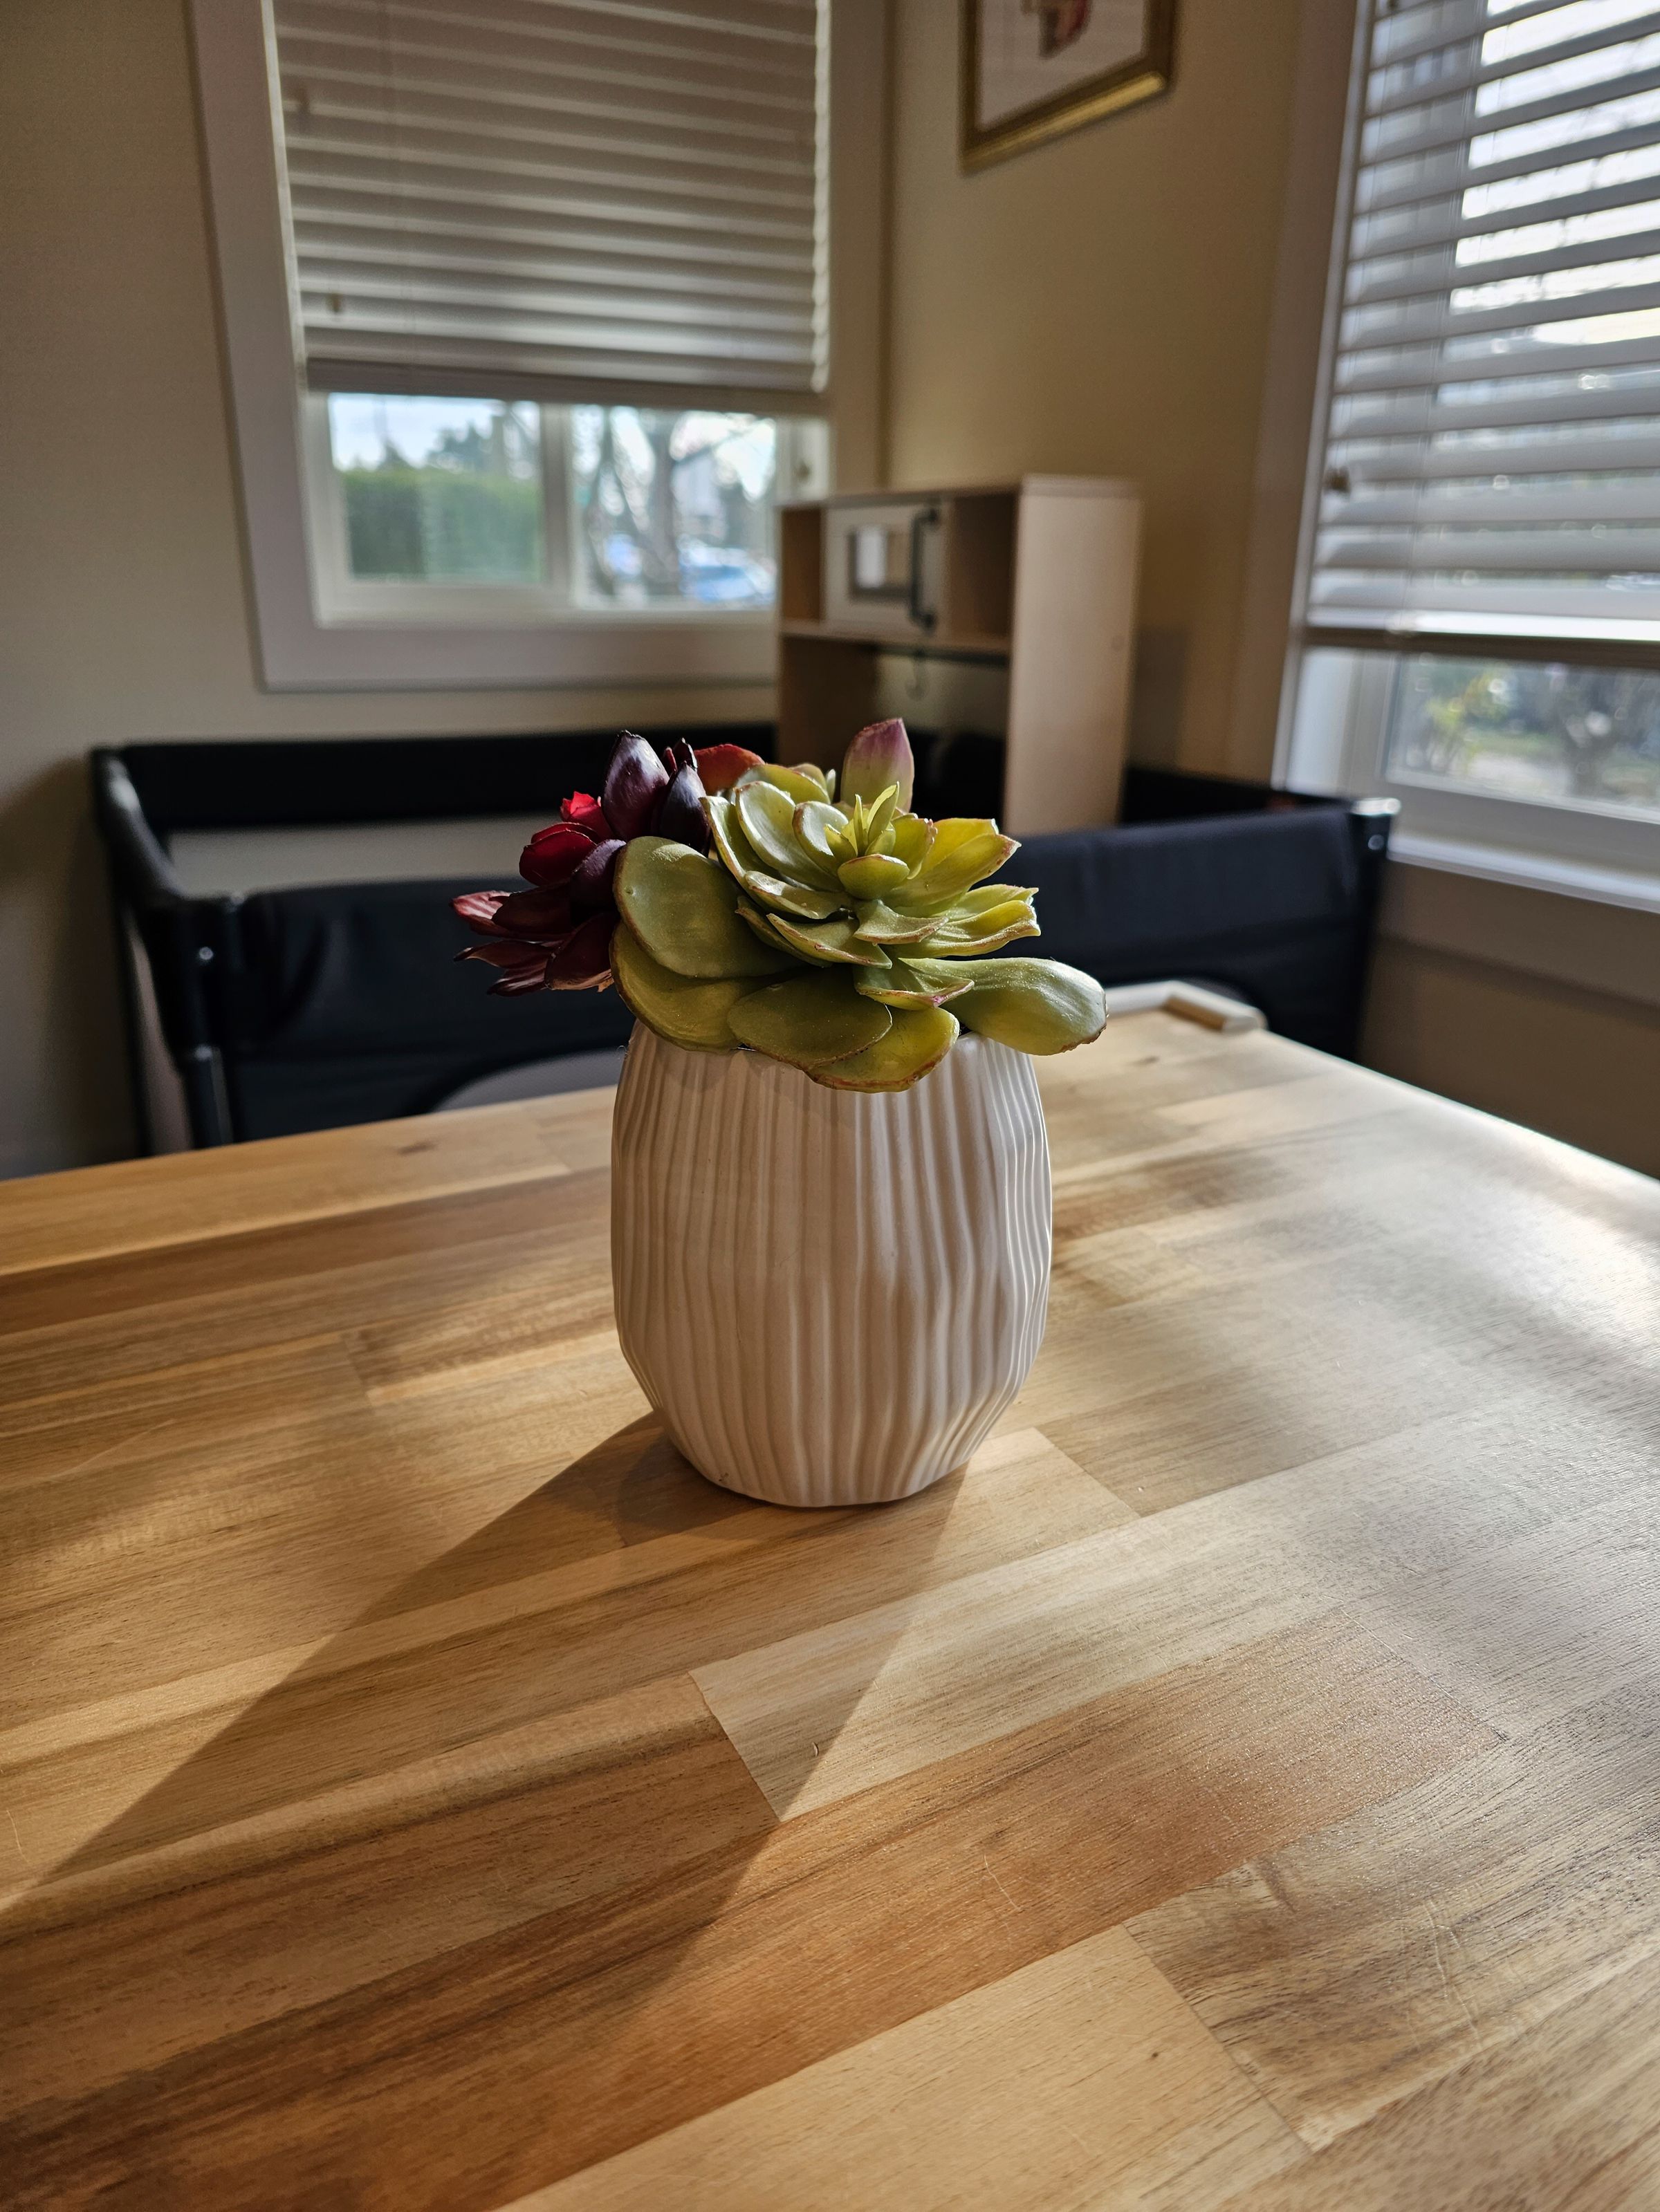 Photo of a fake succulent on a table with a slightly blurred background behind.